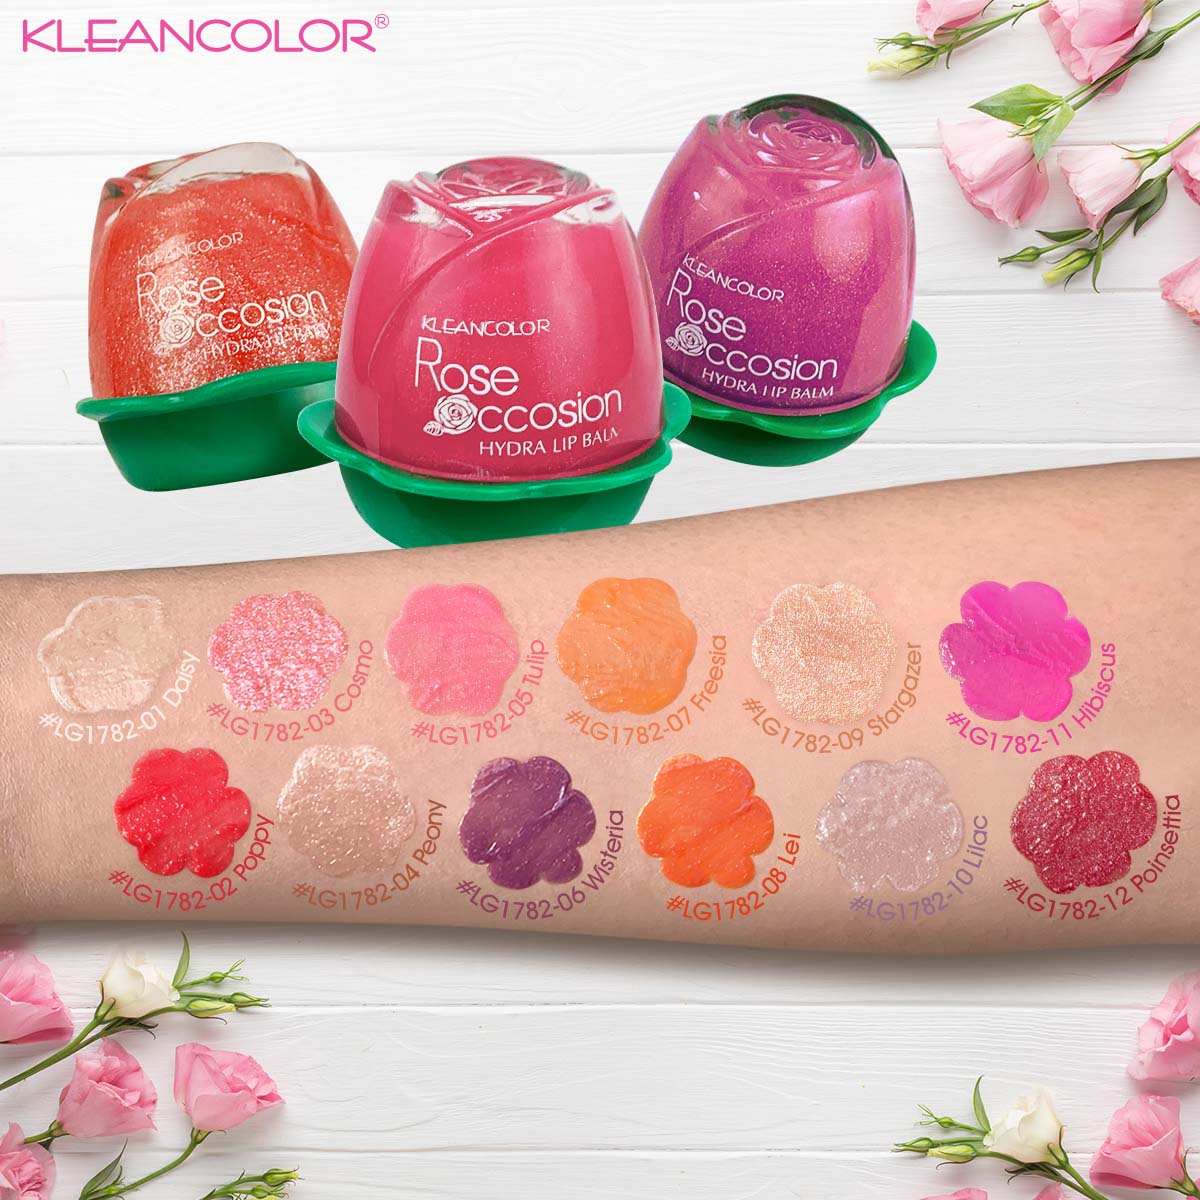 Kleancolor Rose Occasion Display